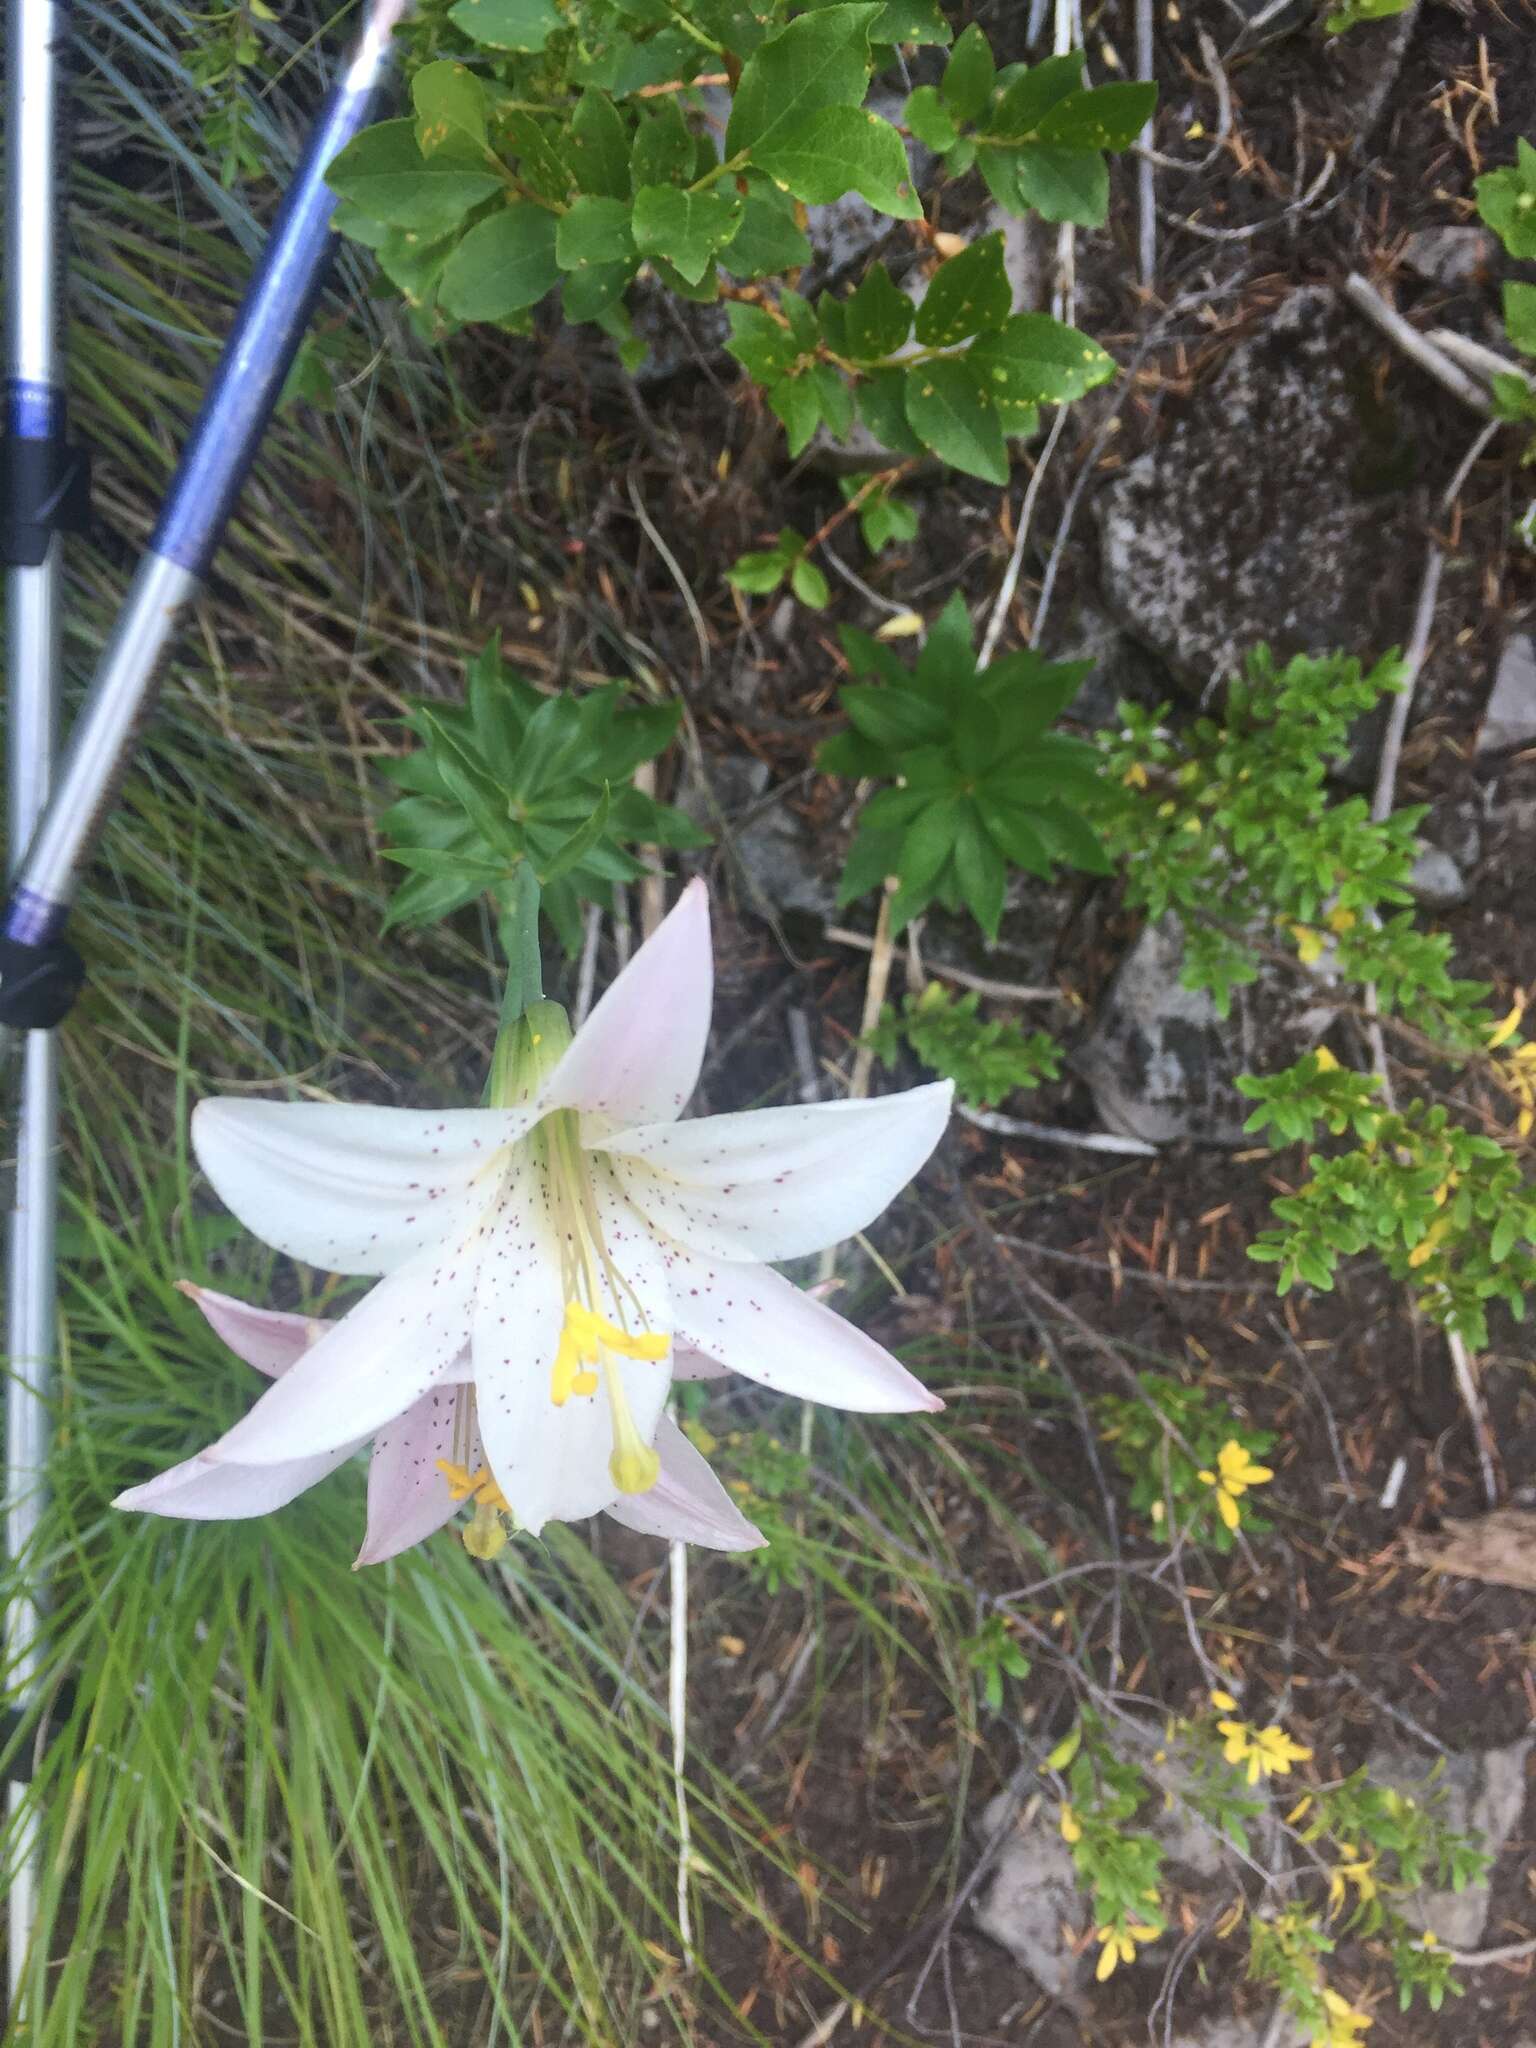 Image of Cascade lily